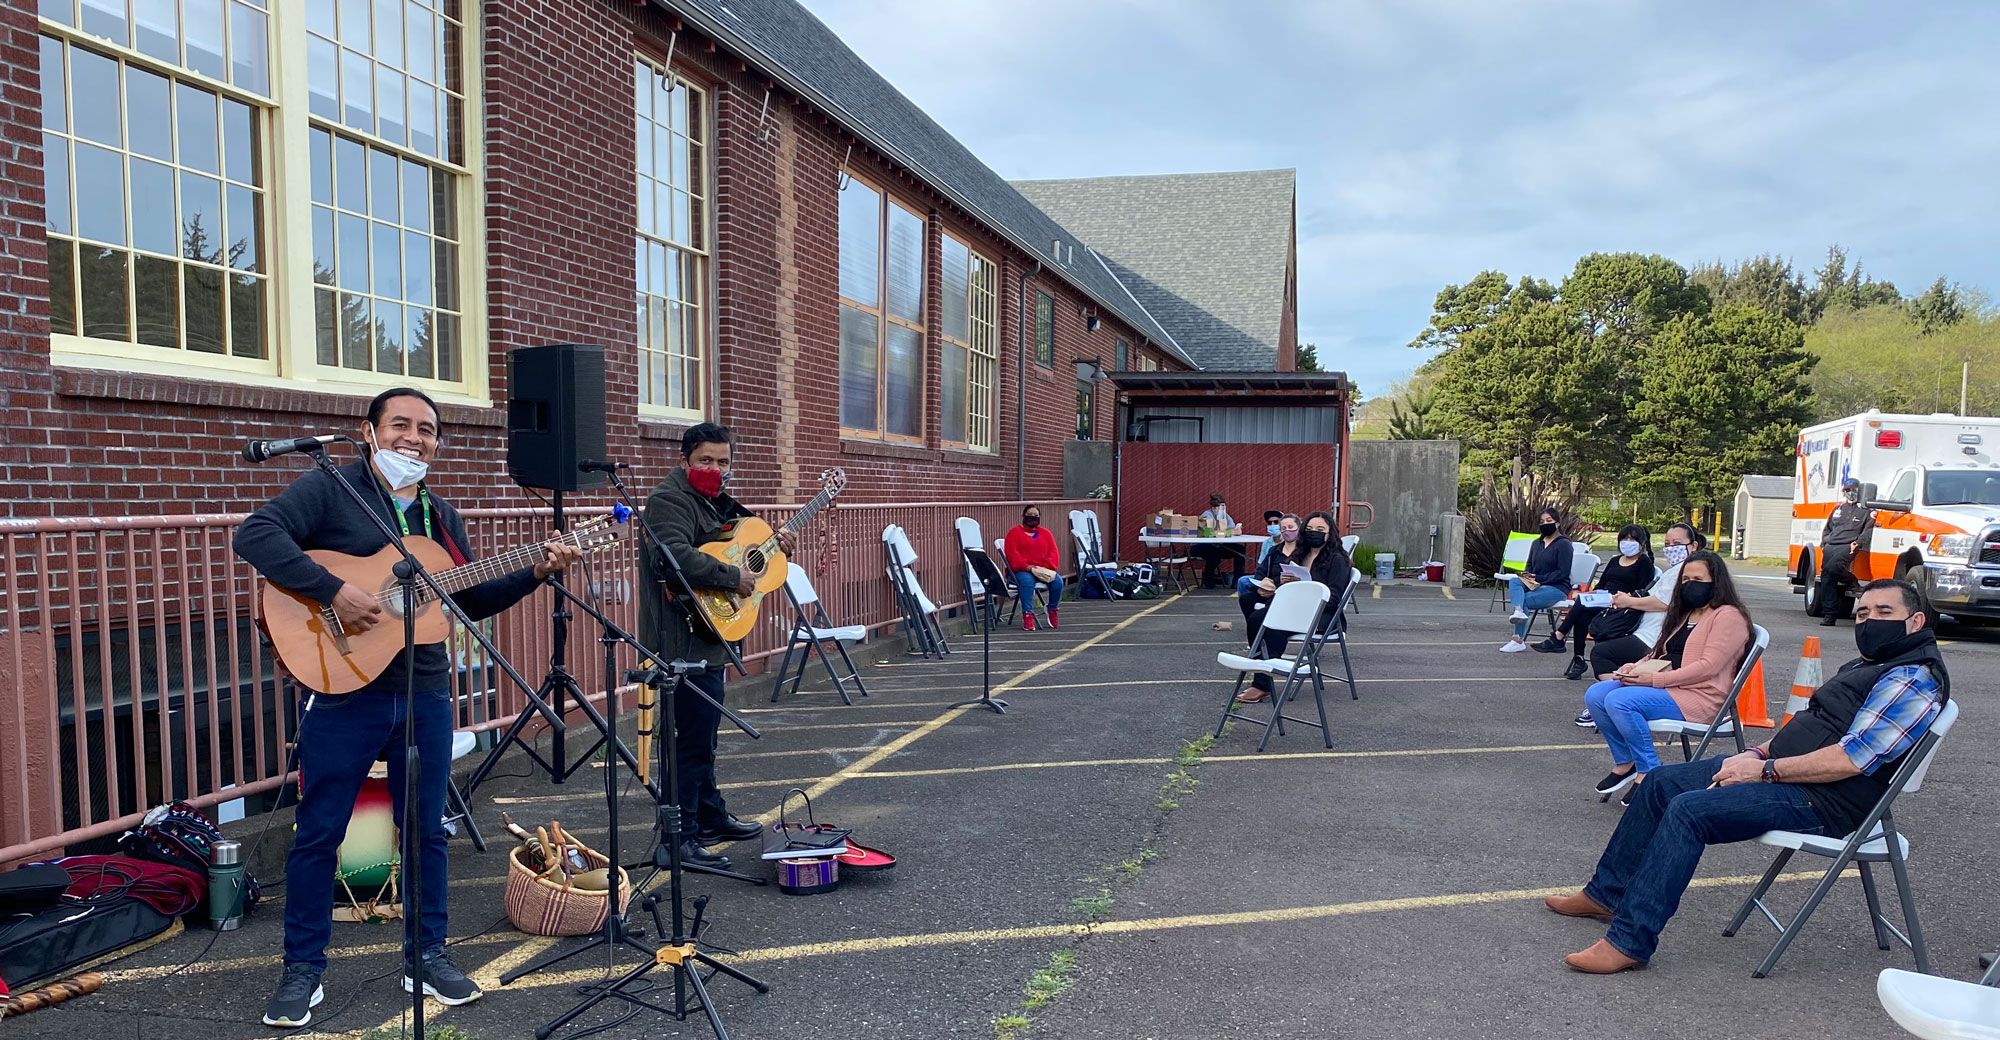 A brick community center provides a backdrop to musicians playing guitars at a COVID-19 vaccination clinic. Vaccine recipients wearing mass sit carefully spaced out to listen. An ambulance and health volunteers are in the background.